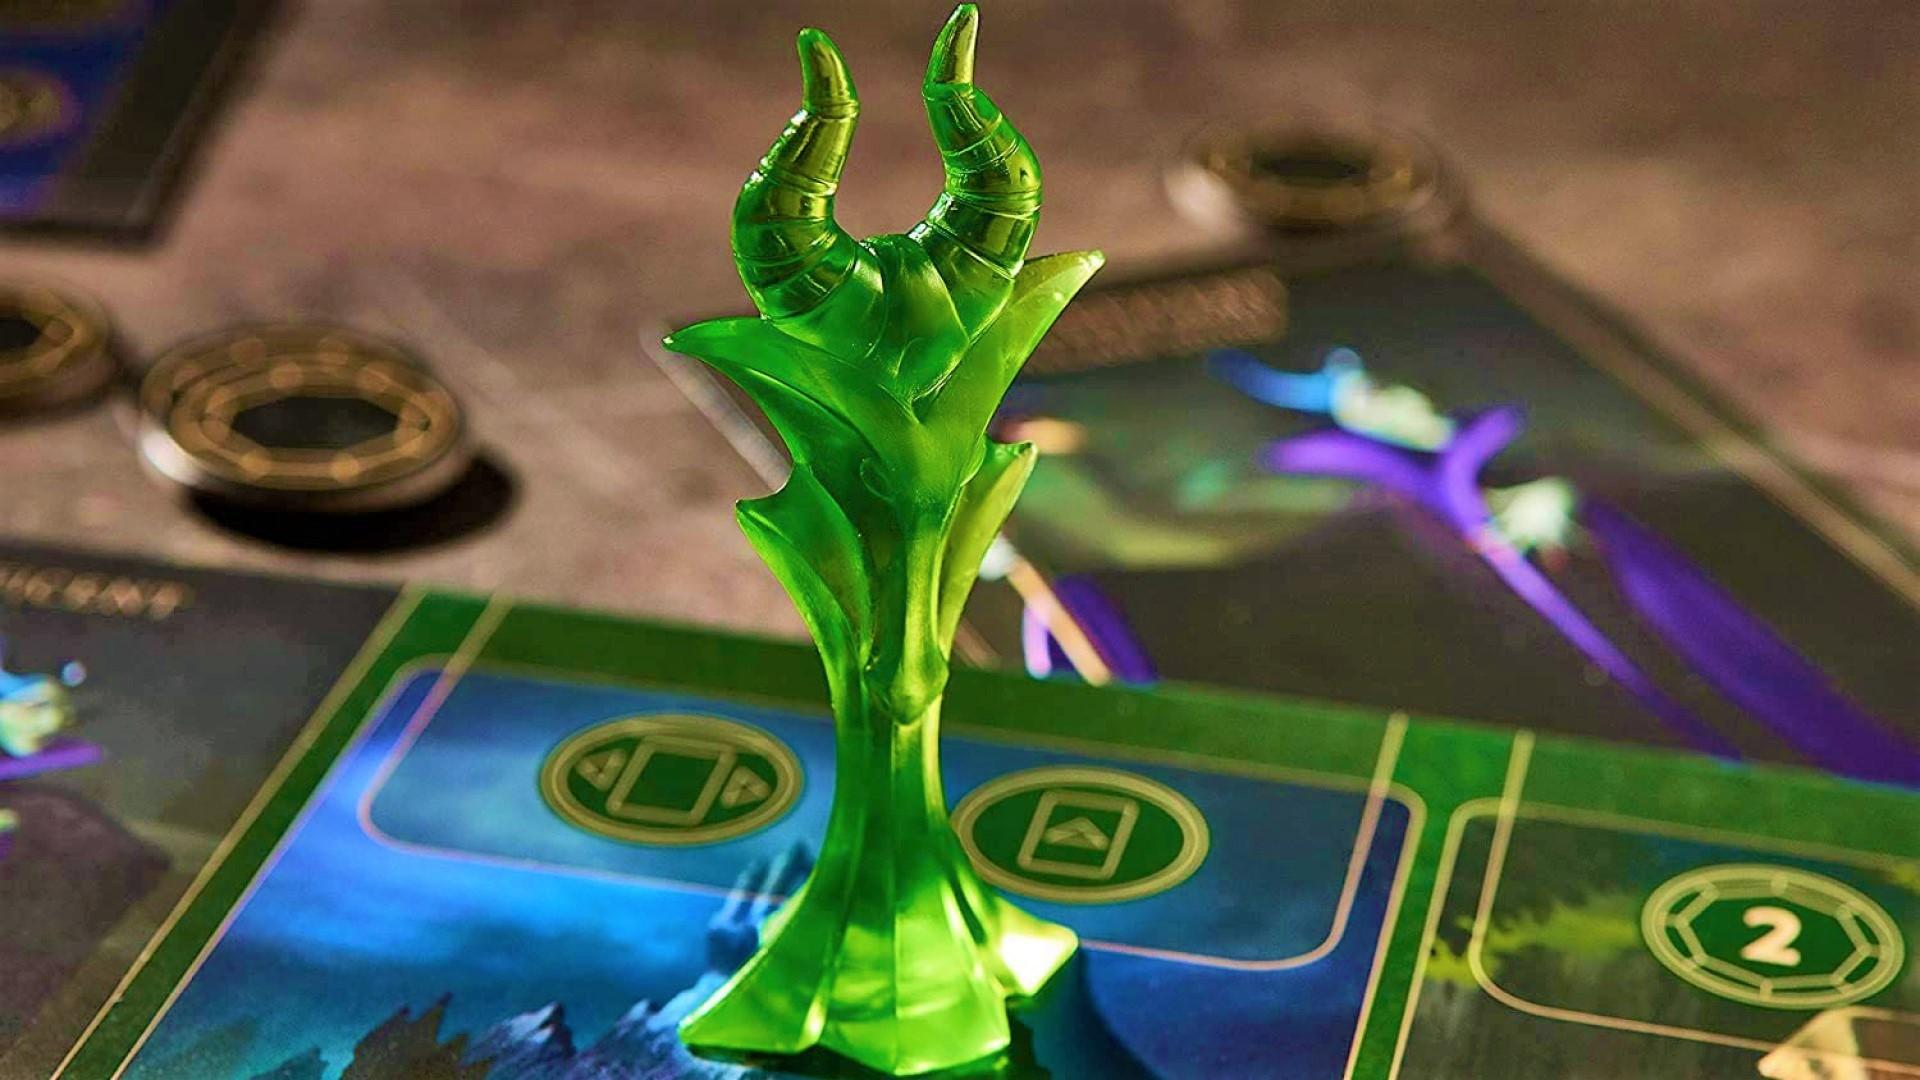 35 Best Board Games for Kids of 2023